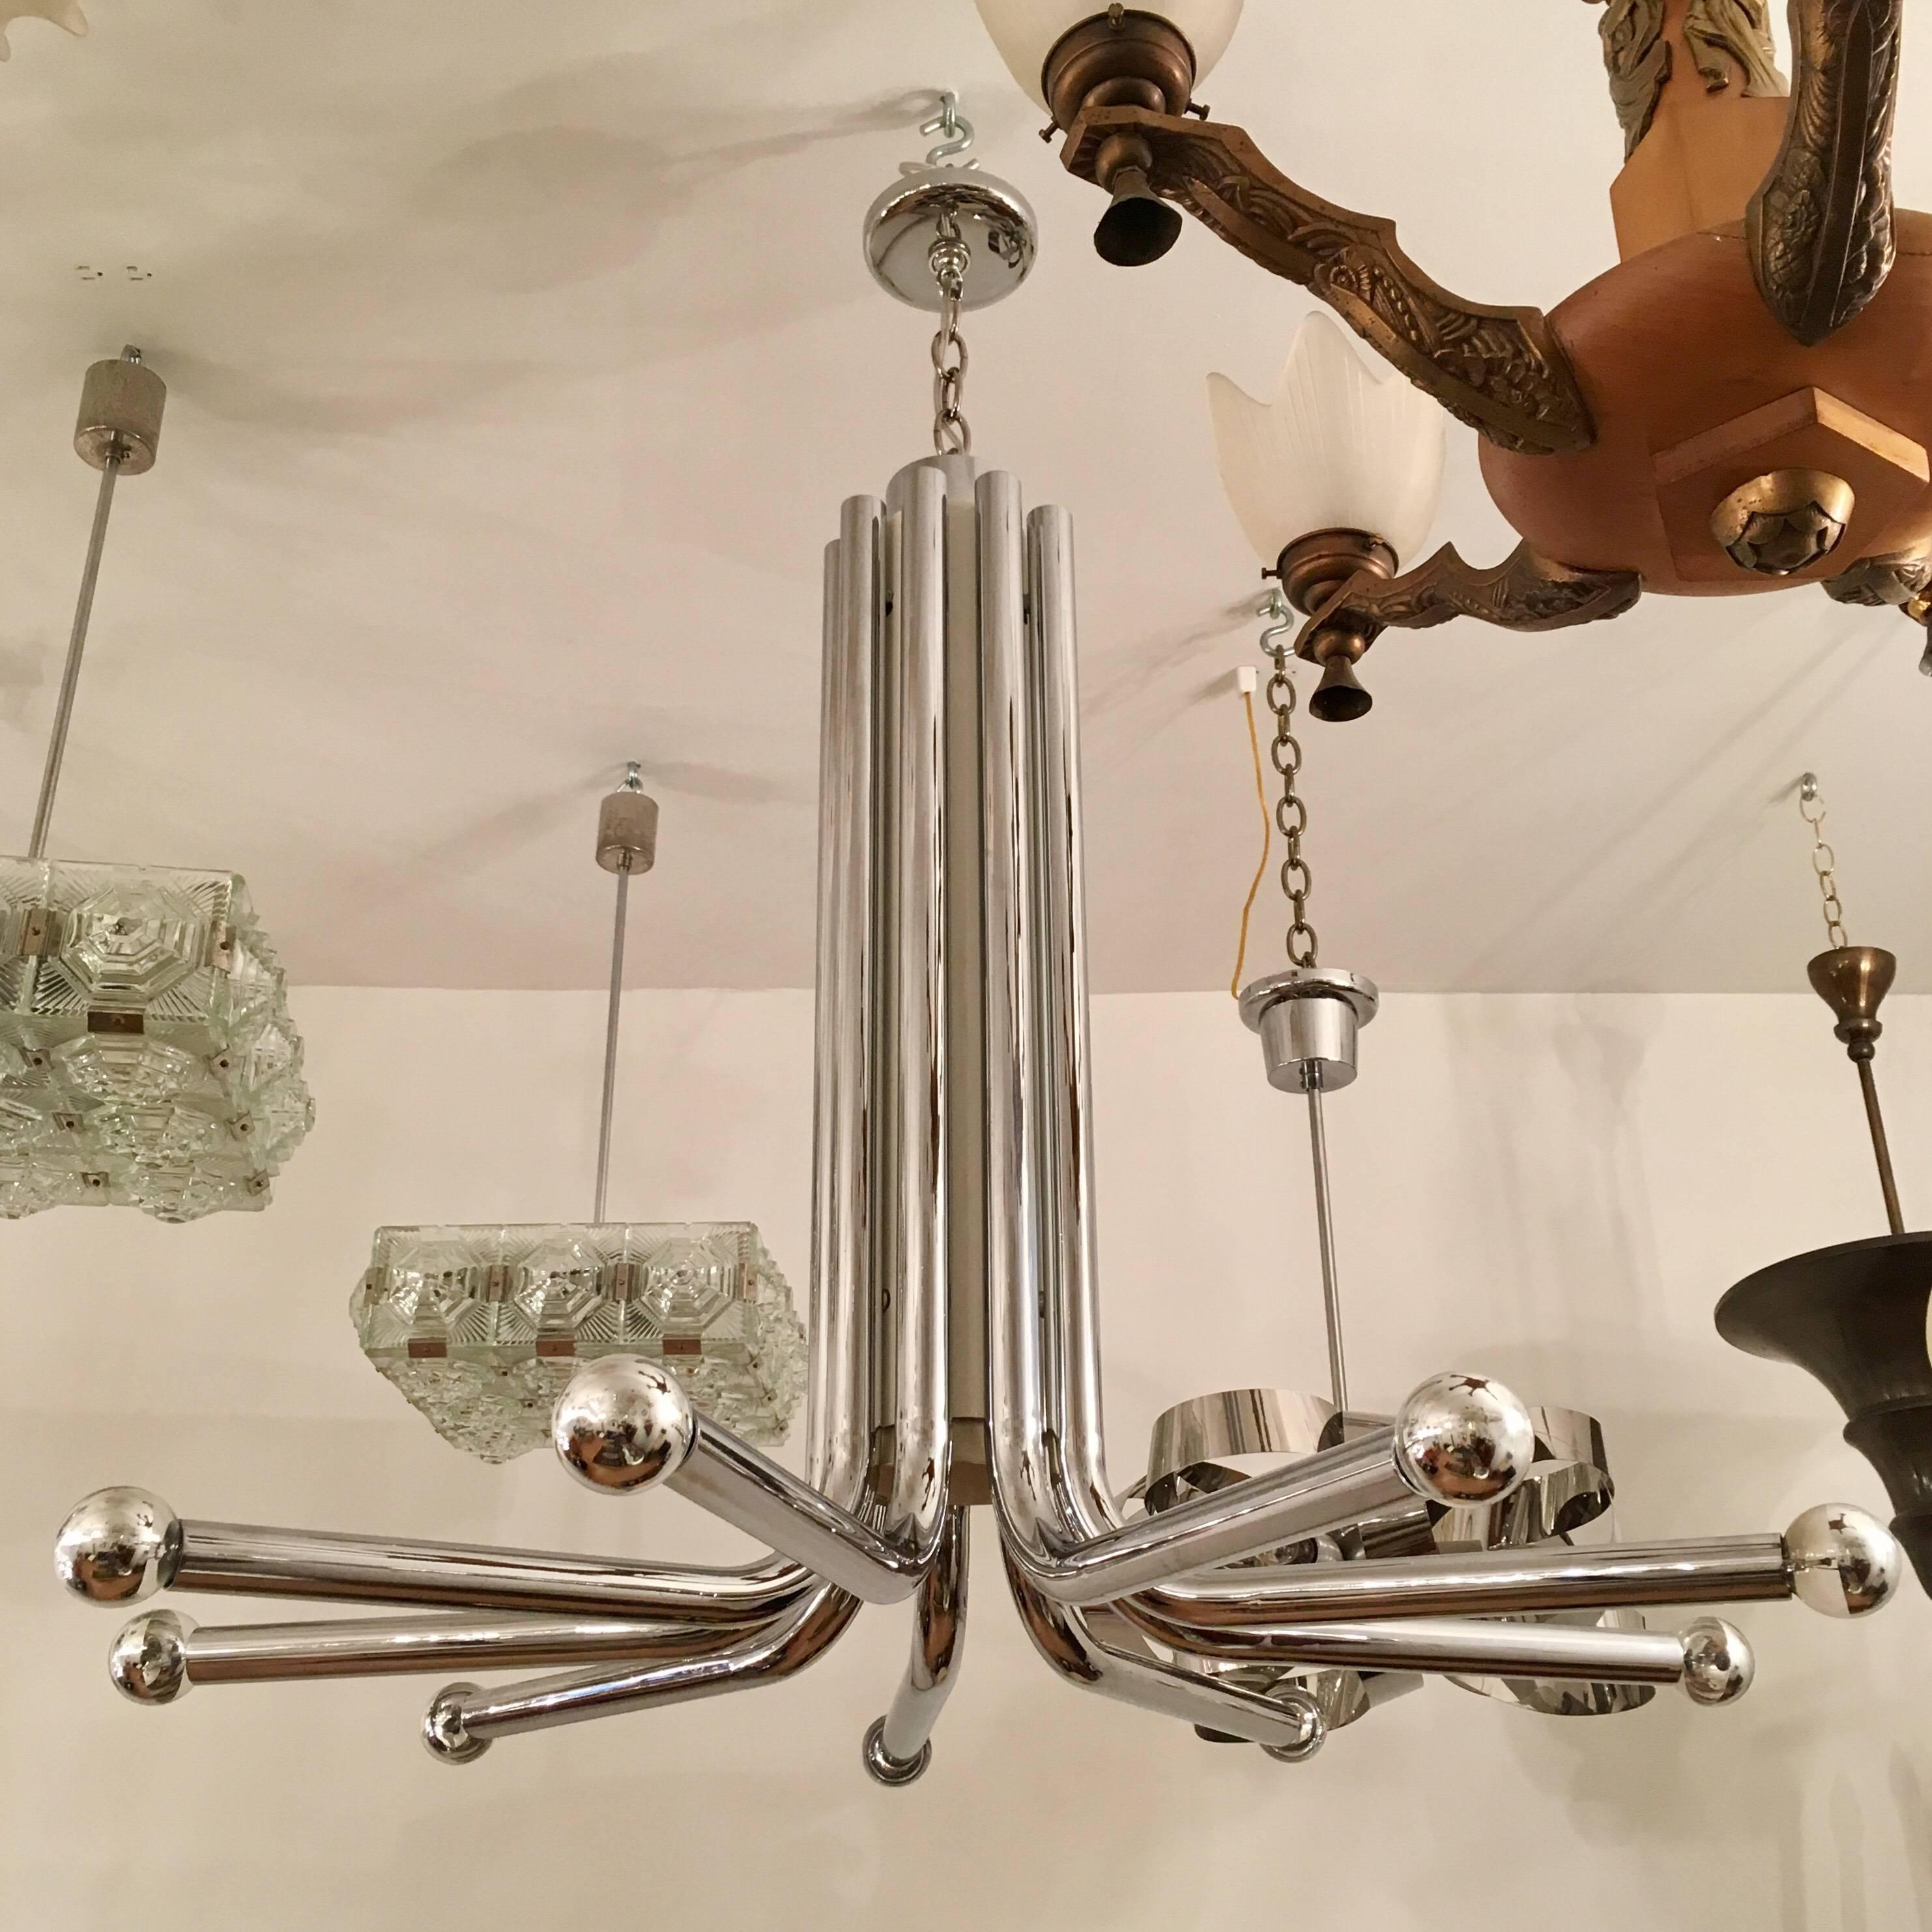 A highly sought 1970s polished chrome sculptural chandelier by the famed Italian lighting company, Esperia, Newly rewired.